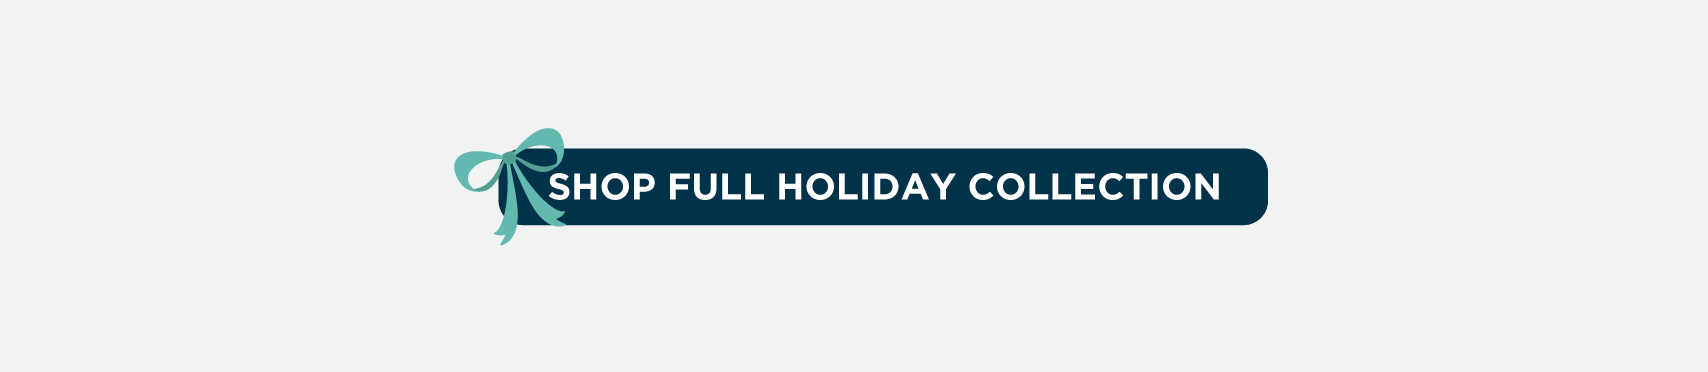 SHOP FULL HOLIDAY COLLECTION